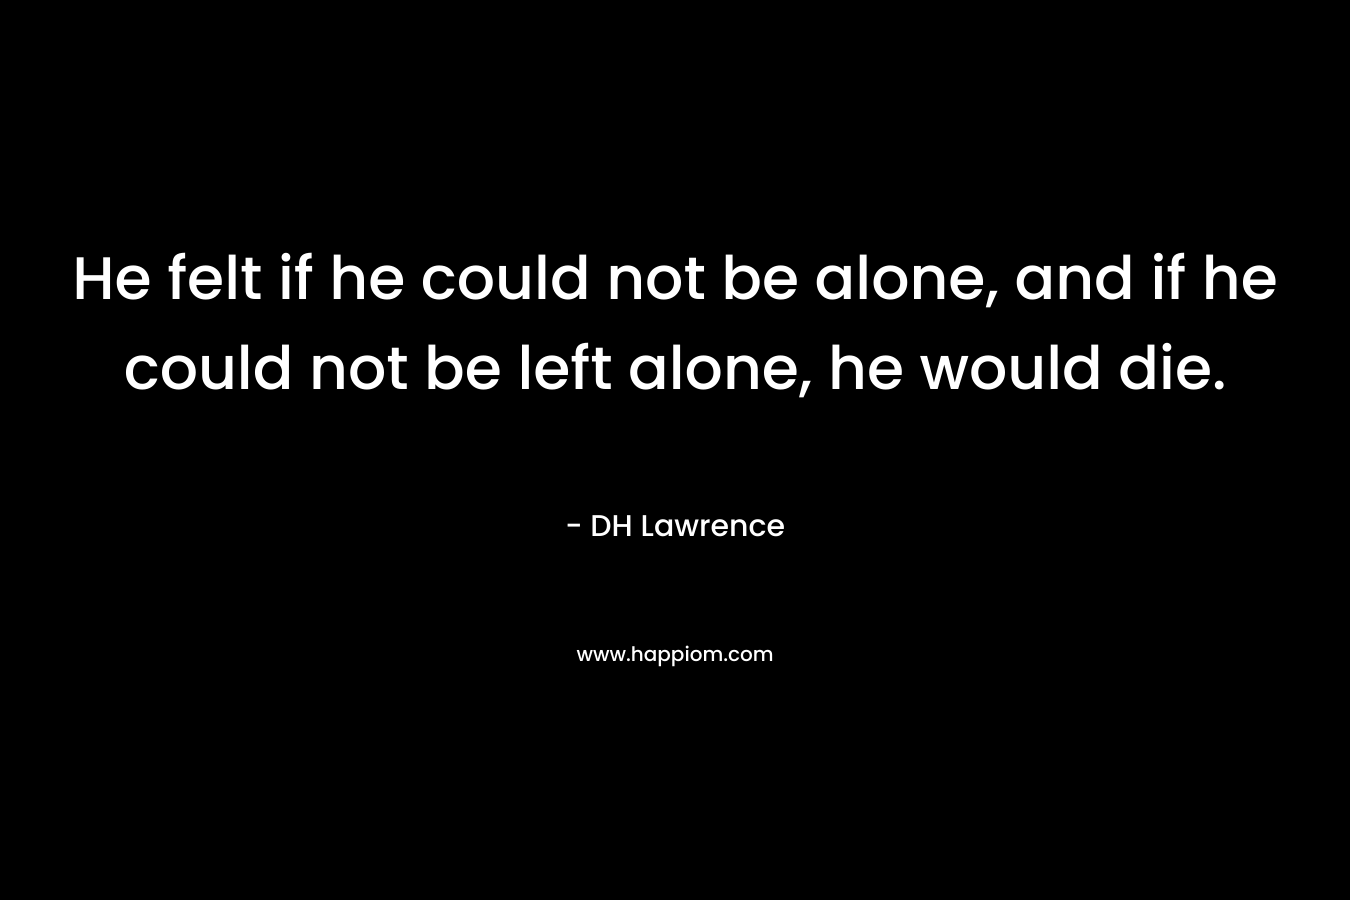 He felt if he could not be alone, and if he could not be left alone, he would die. – DH Lawrence